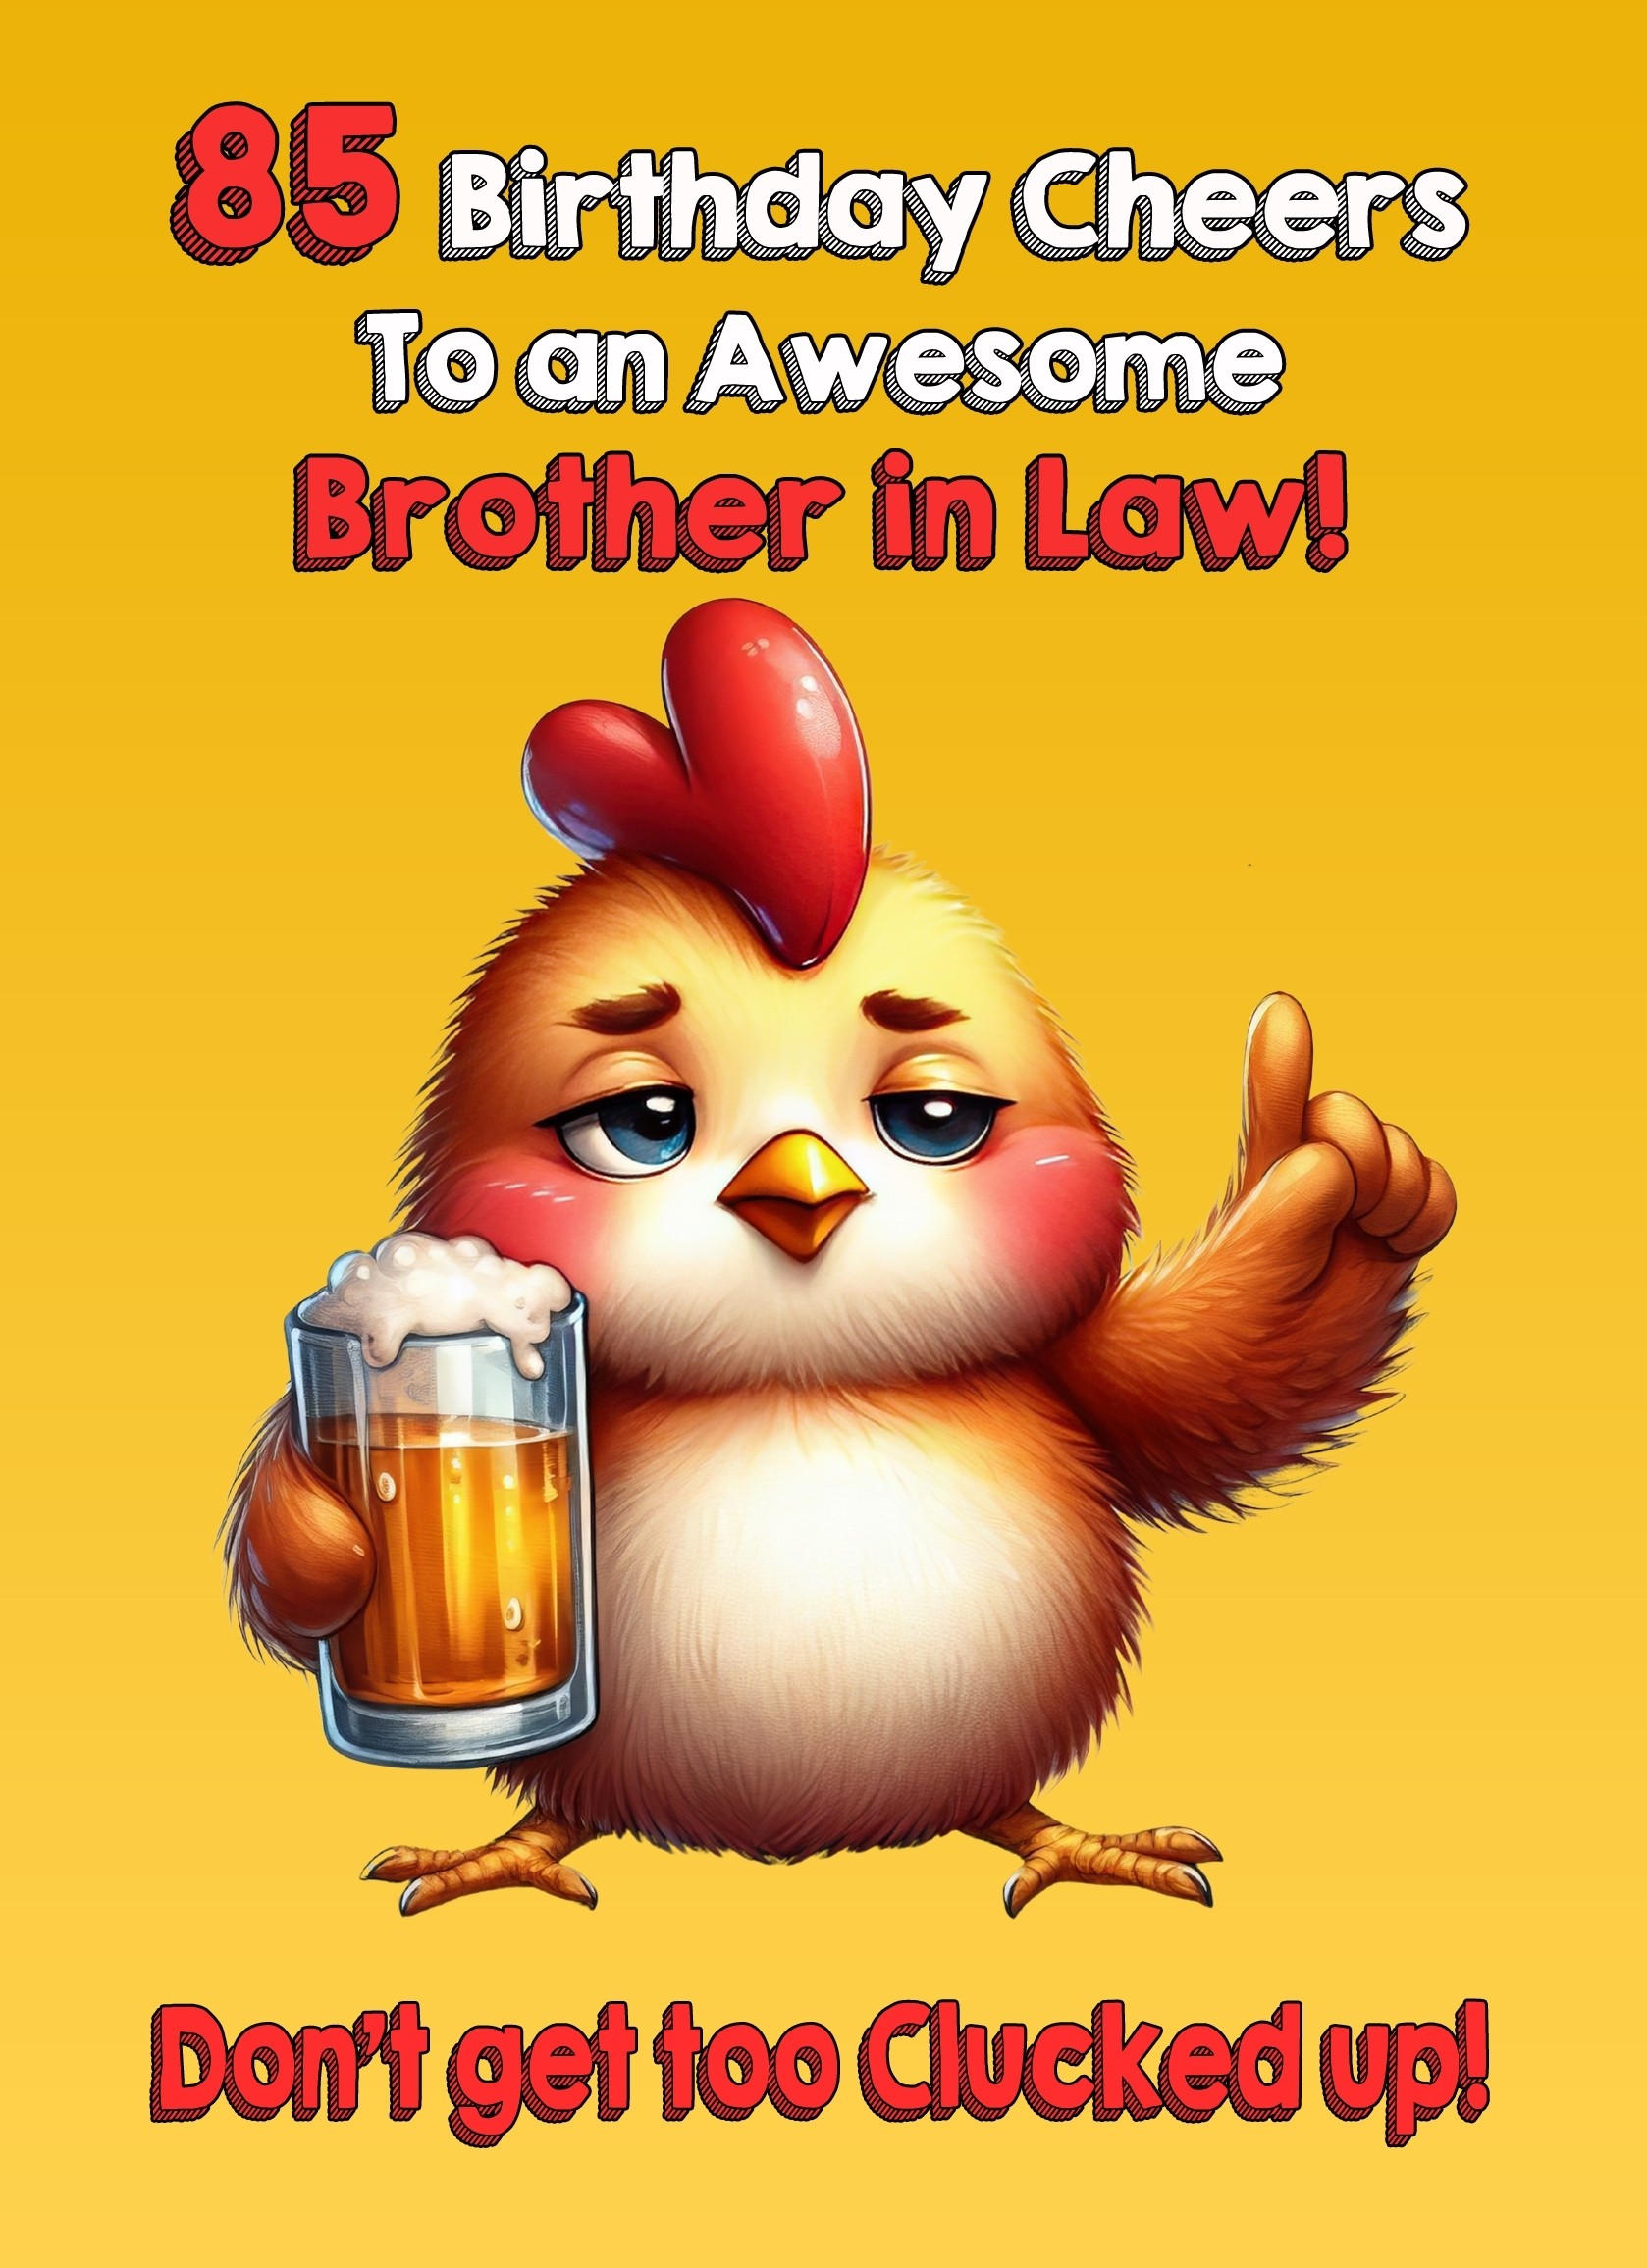 Brother in Law 85th Birthday Card (Funny Beer Chicken Humour)